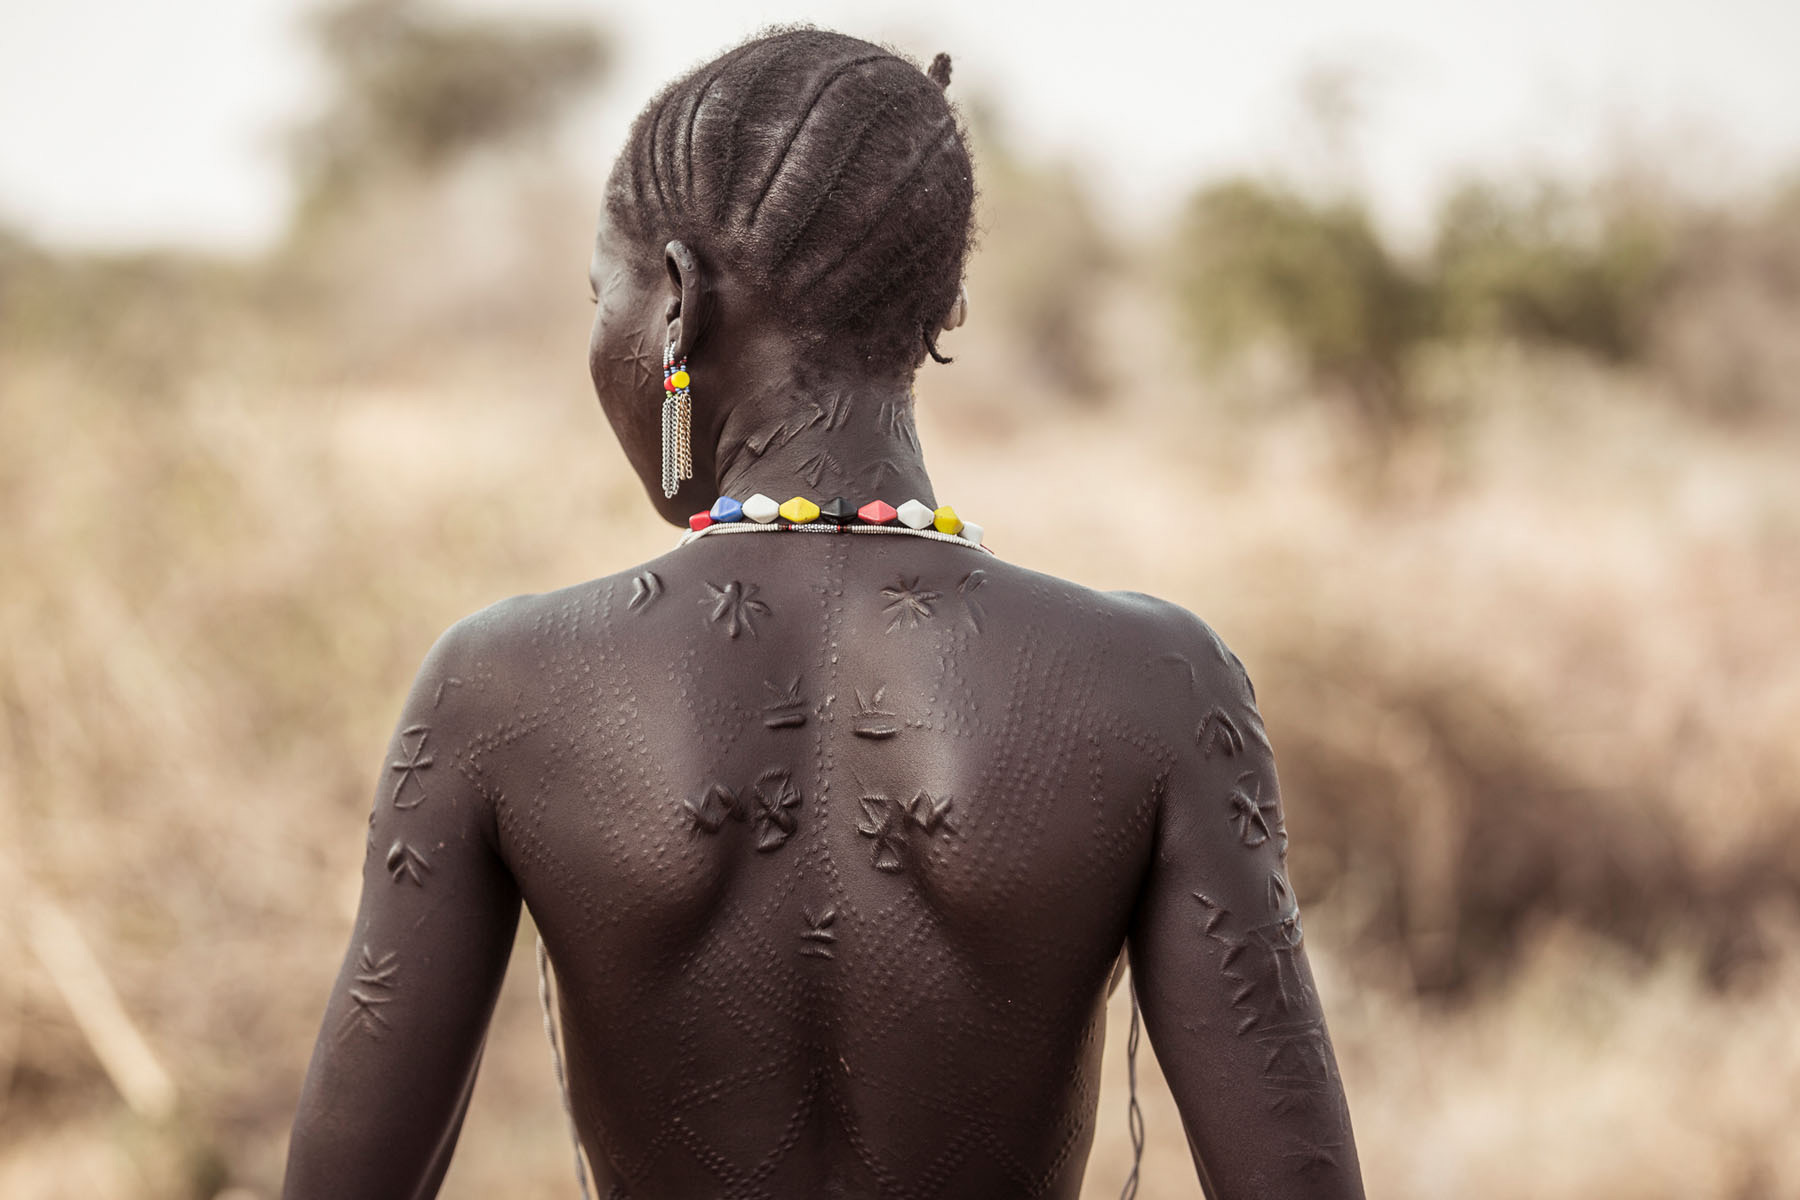 Scarification plays a huge role in tribal life, and is used as a way to distinguish between tribes and show the progression from childhood to adulthood. Here, a Boya girl shows off her scarifications © Joe Buergi